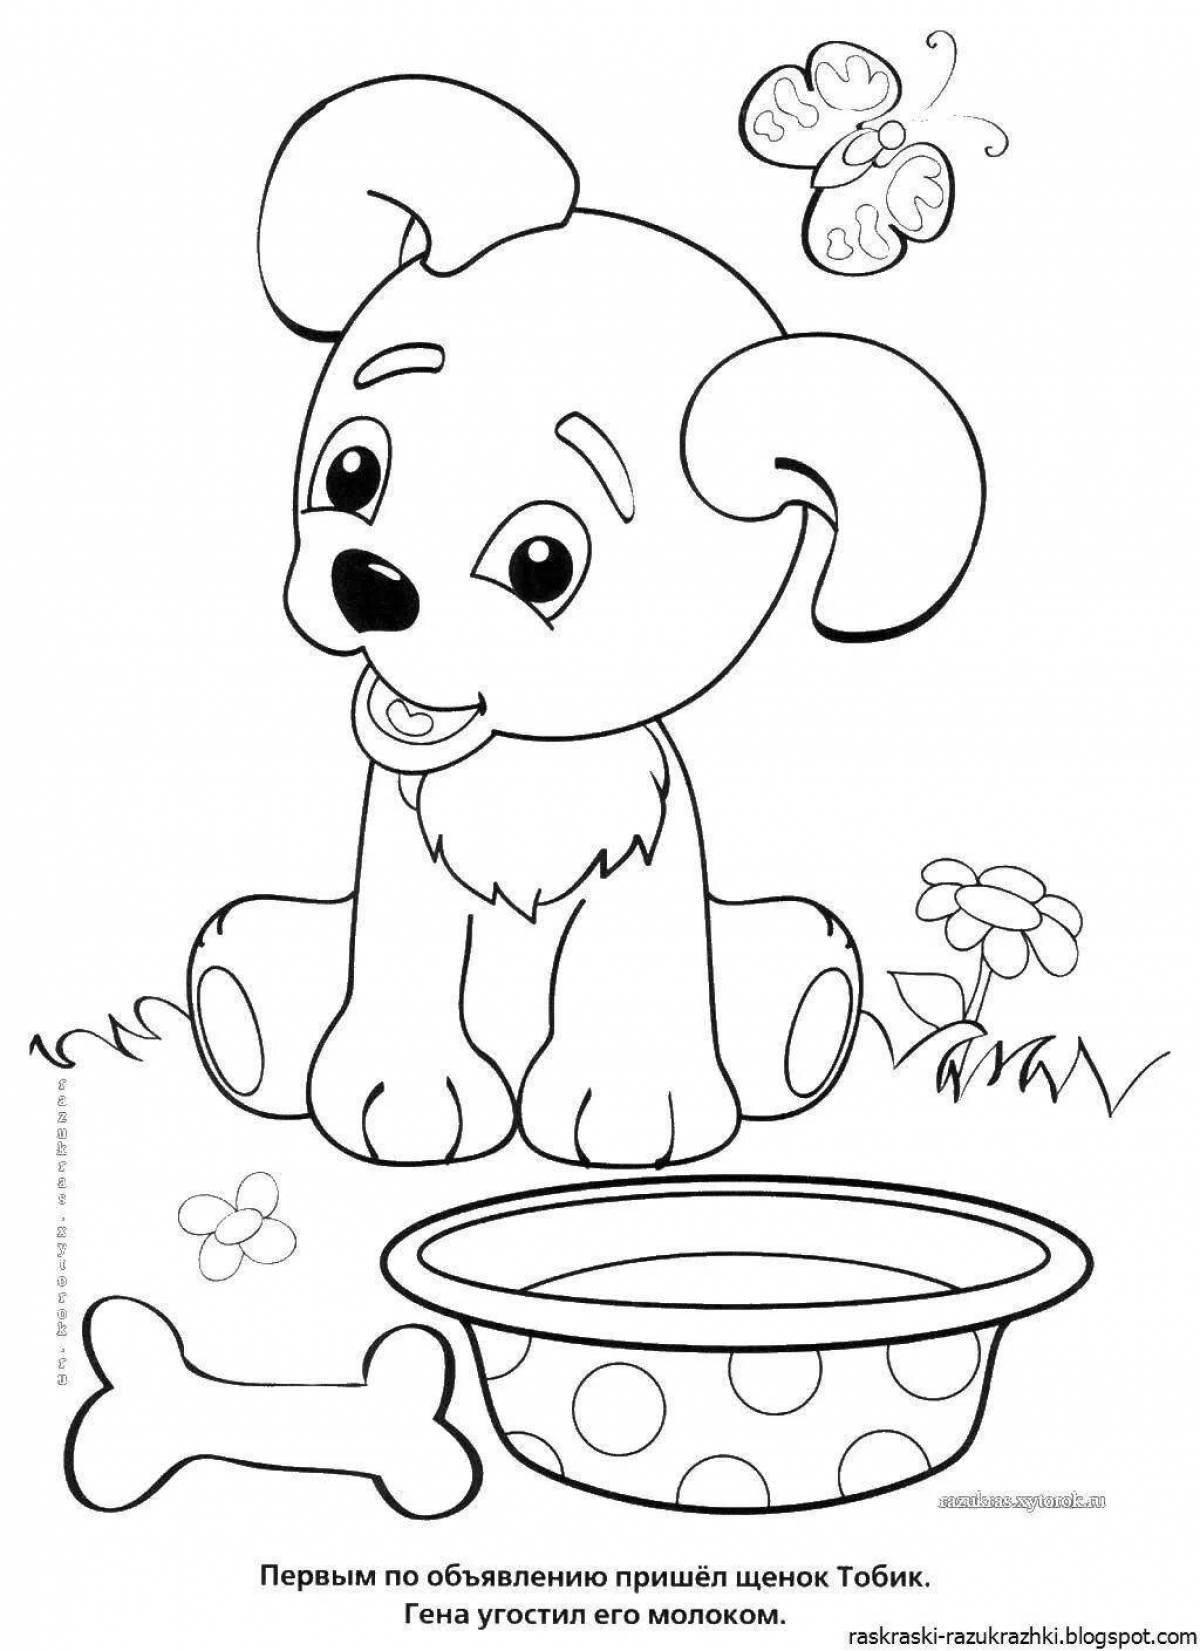 Friendly dog ​​coloring book for kids 2-3 years old